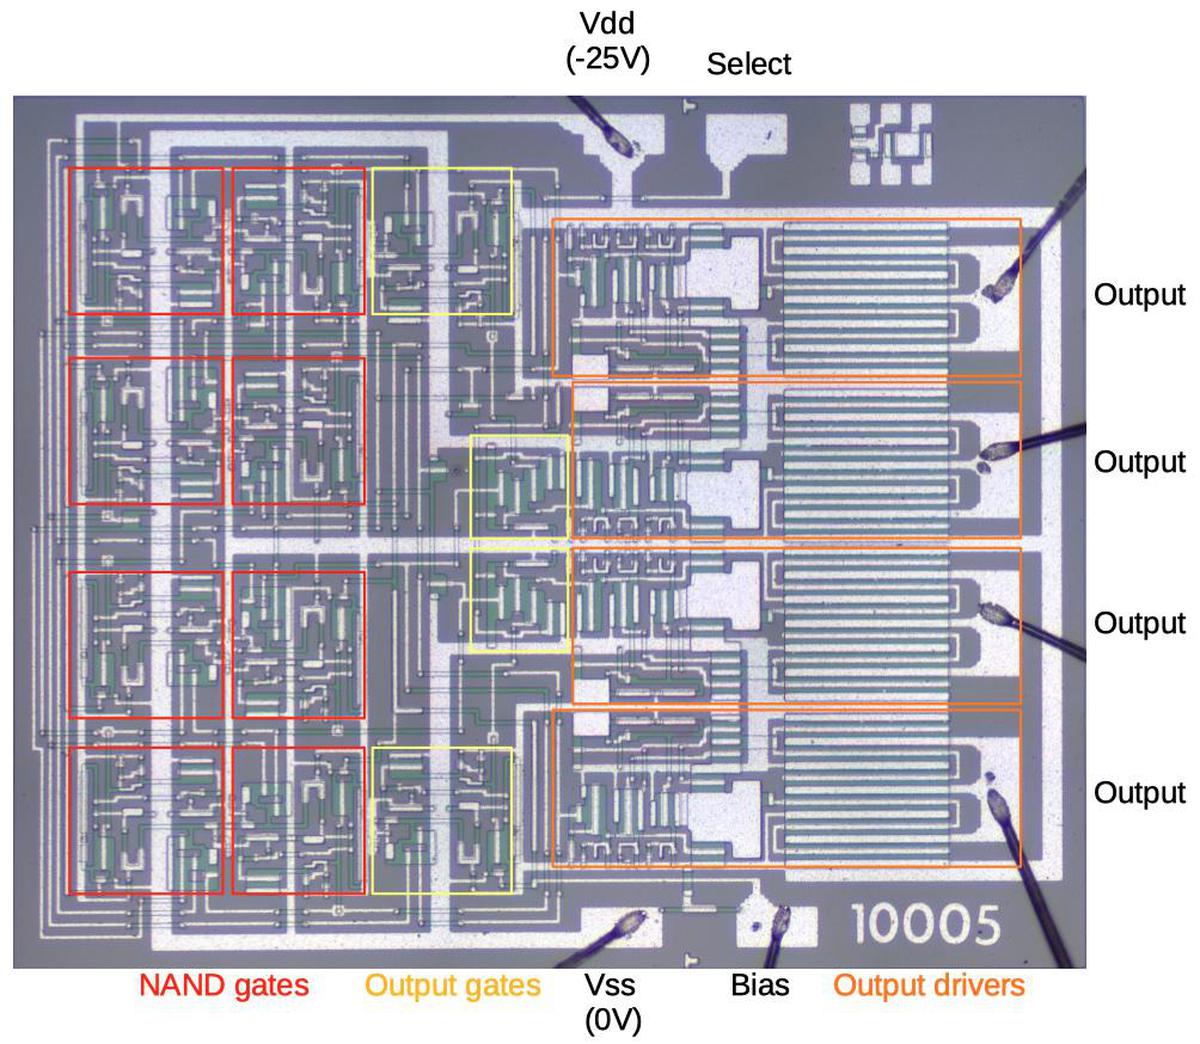 The clock chip die with key components labeled.